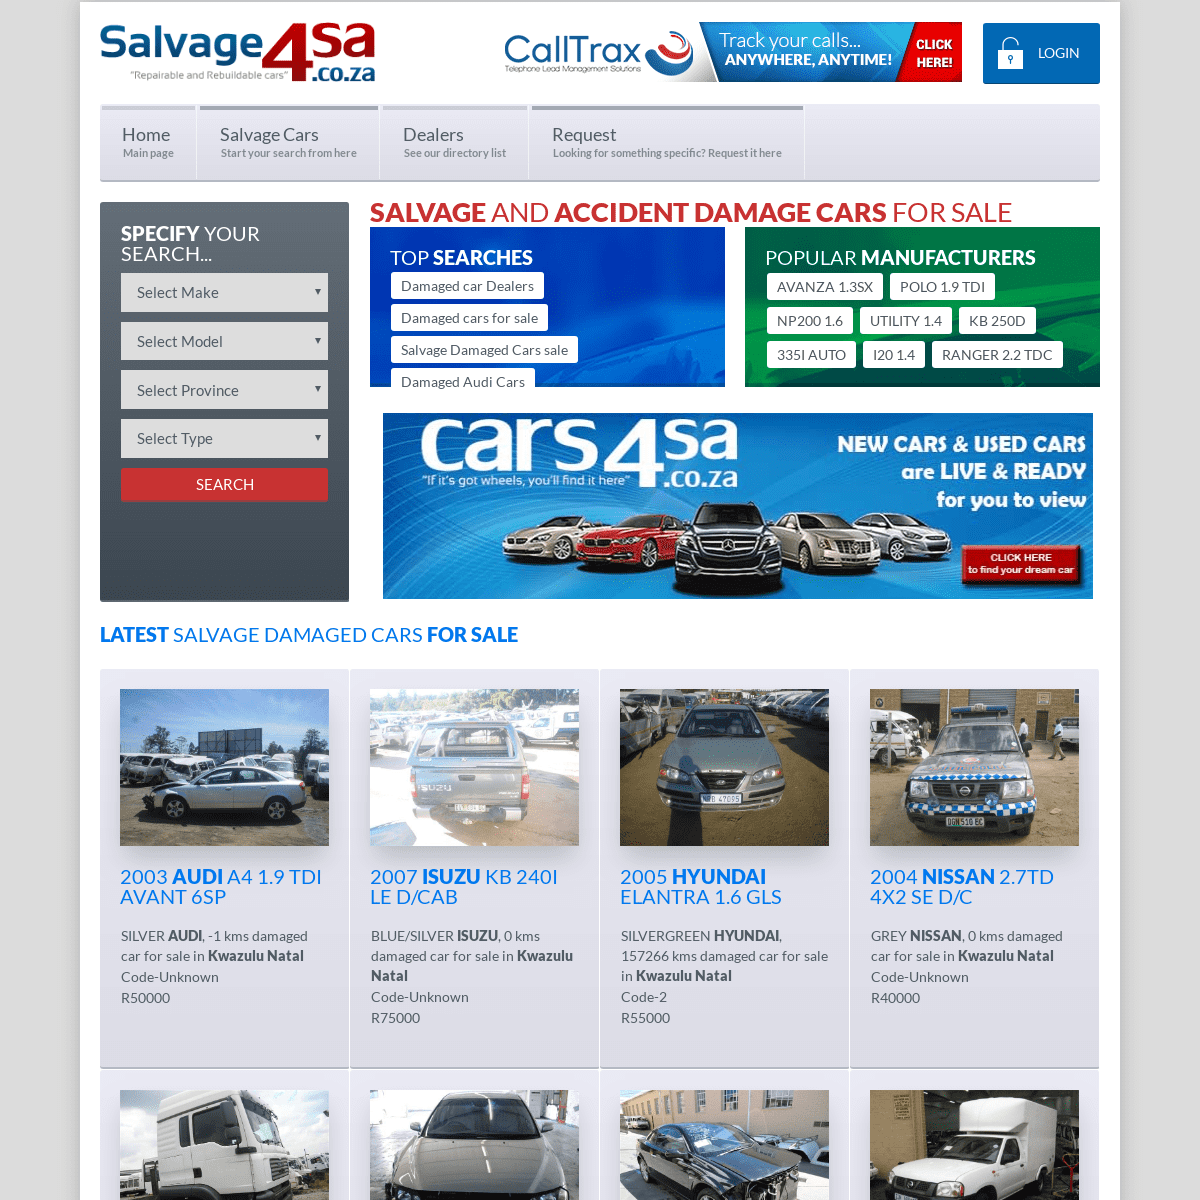 Salvage and accident damaged cars for sale - Salvage4sa